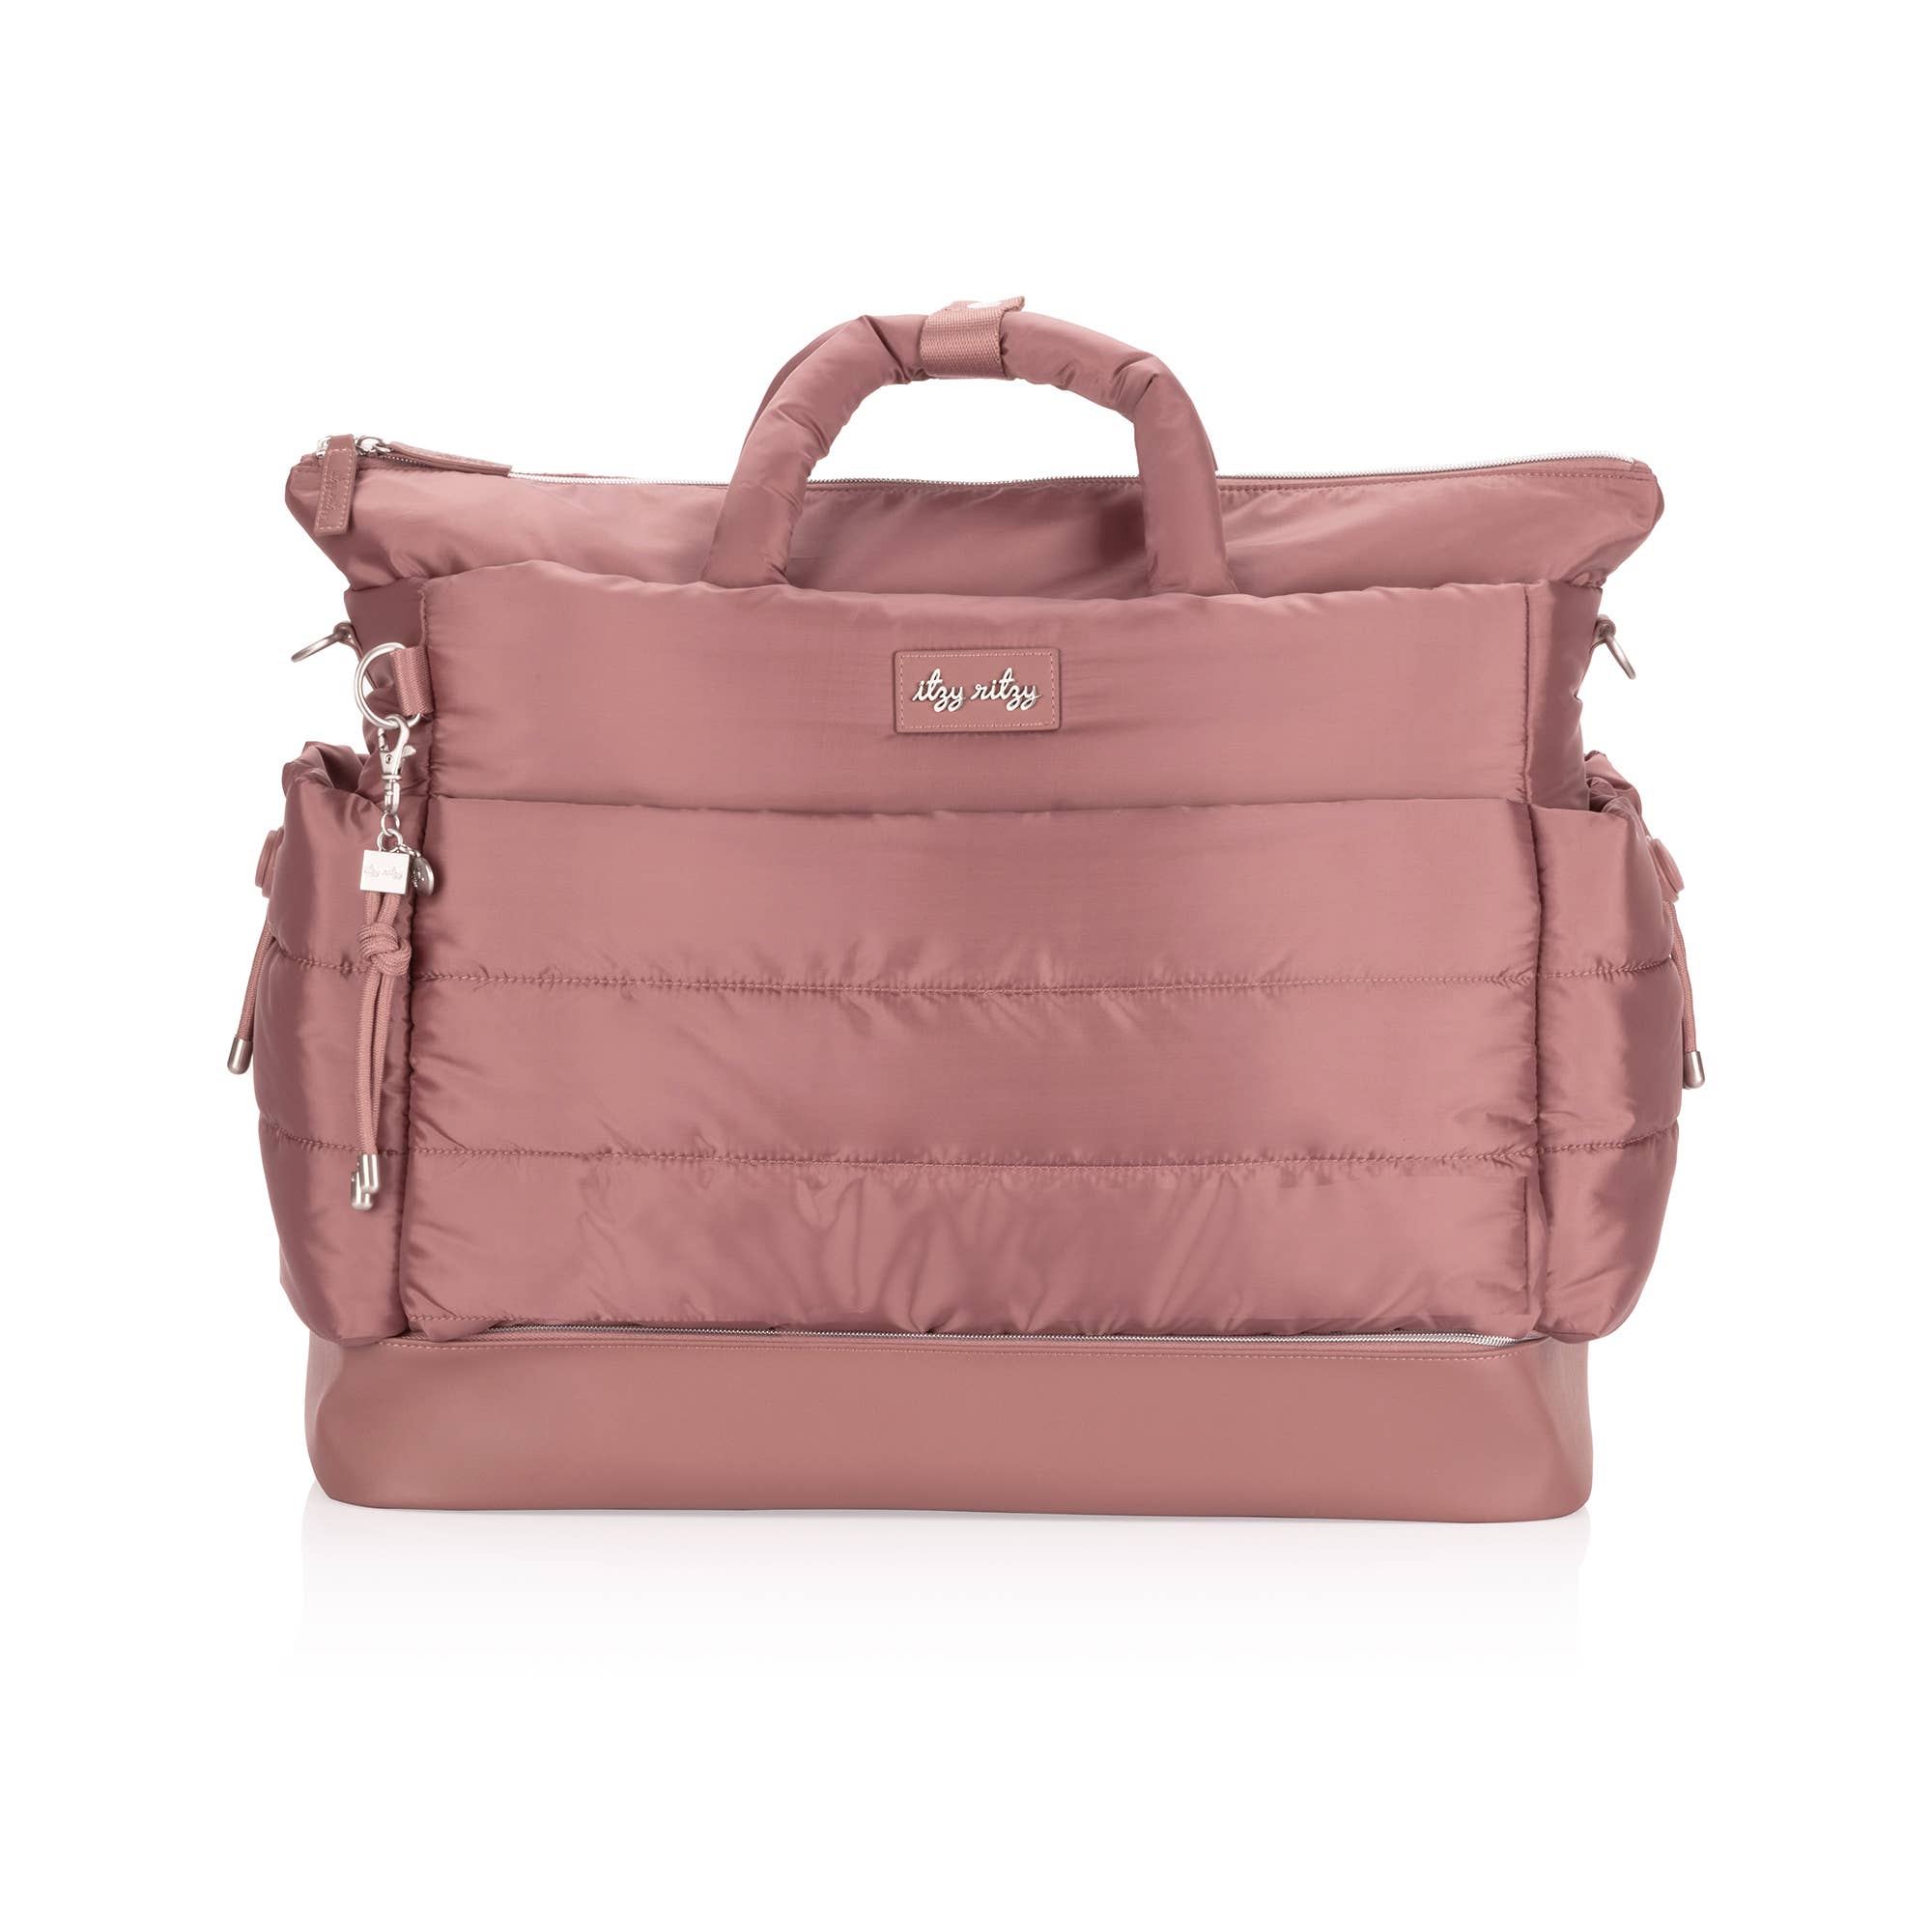 Dream Weekender™ Canyon Rose Diaper Bag *AVAILABLE - LIMITED TIME ONLY